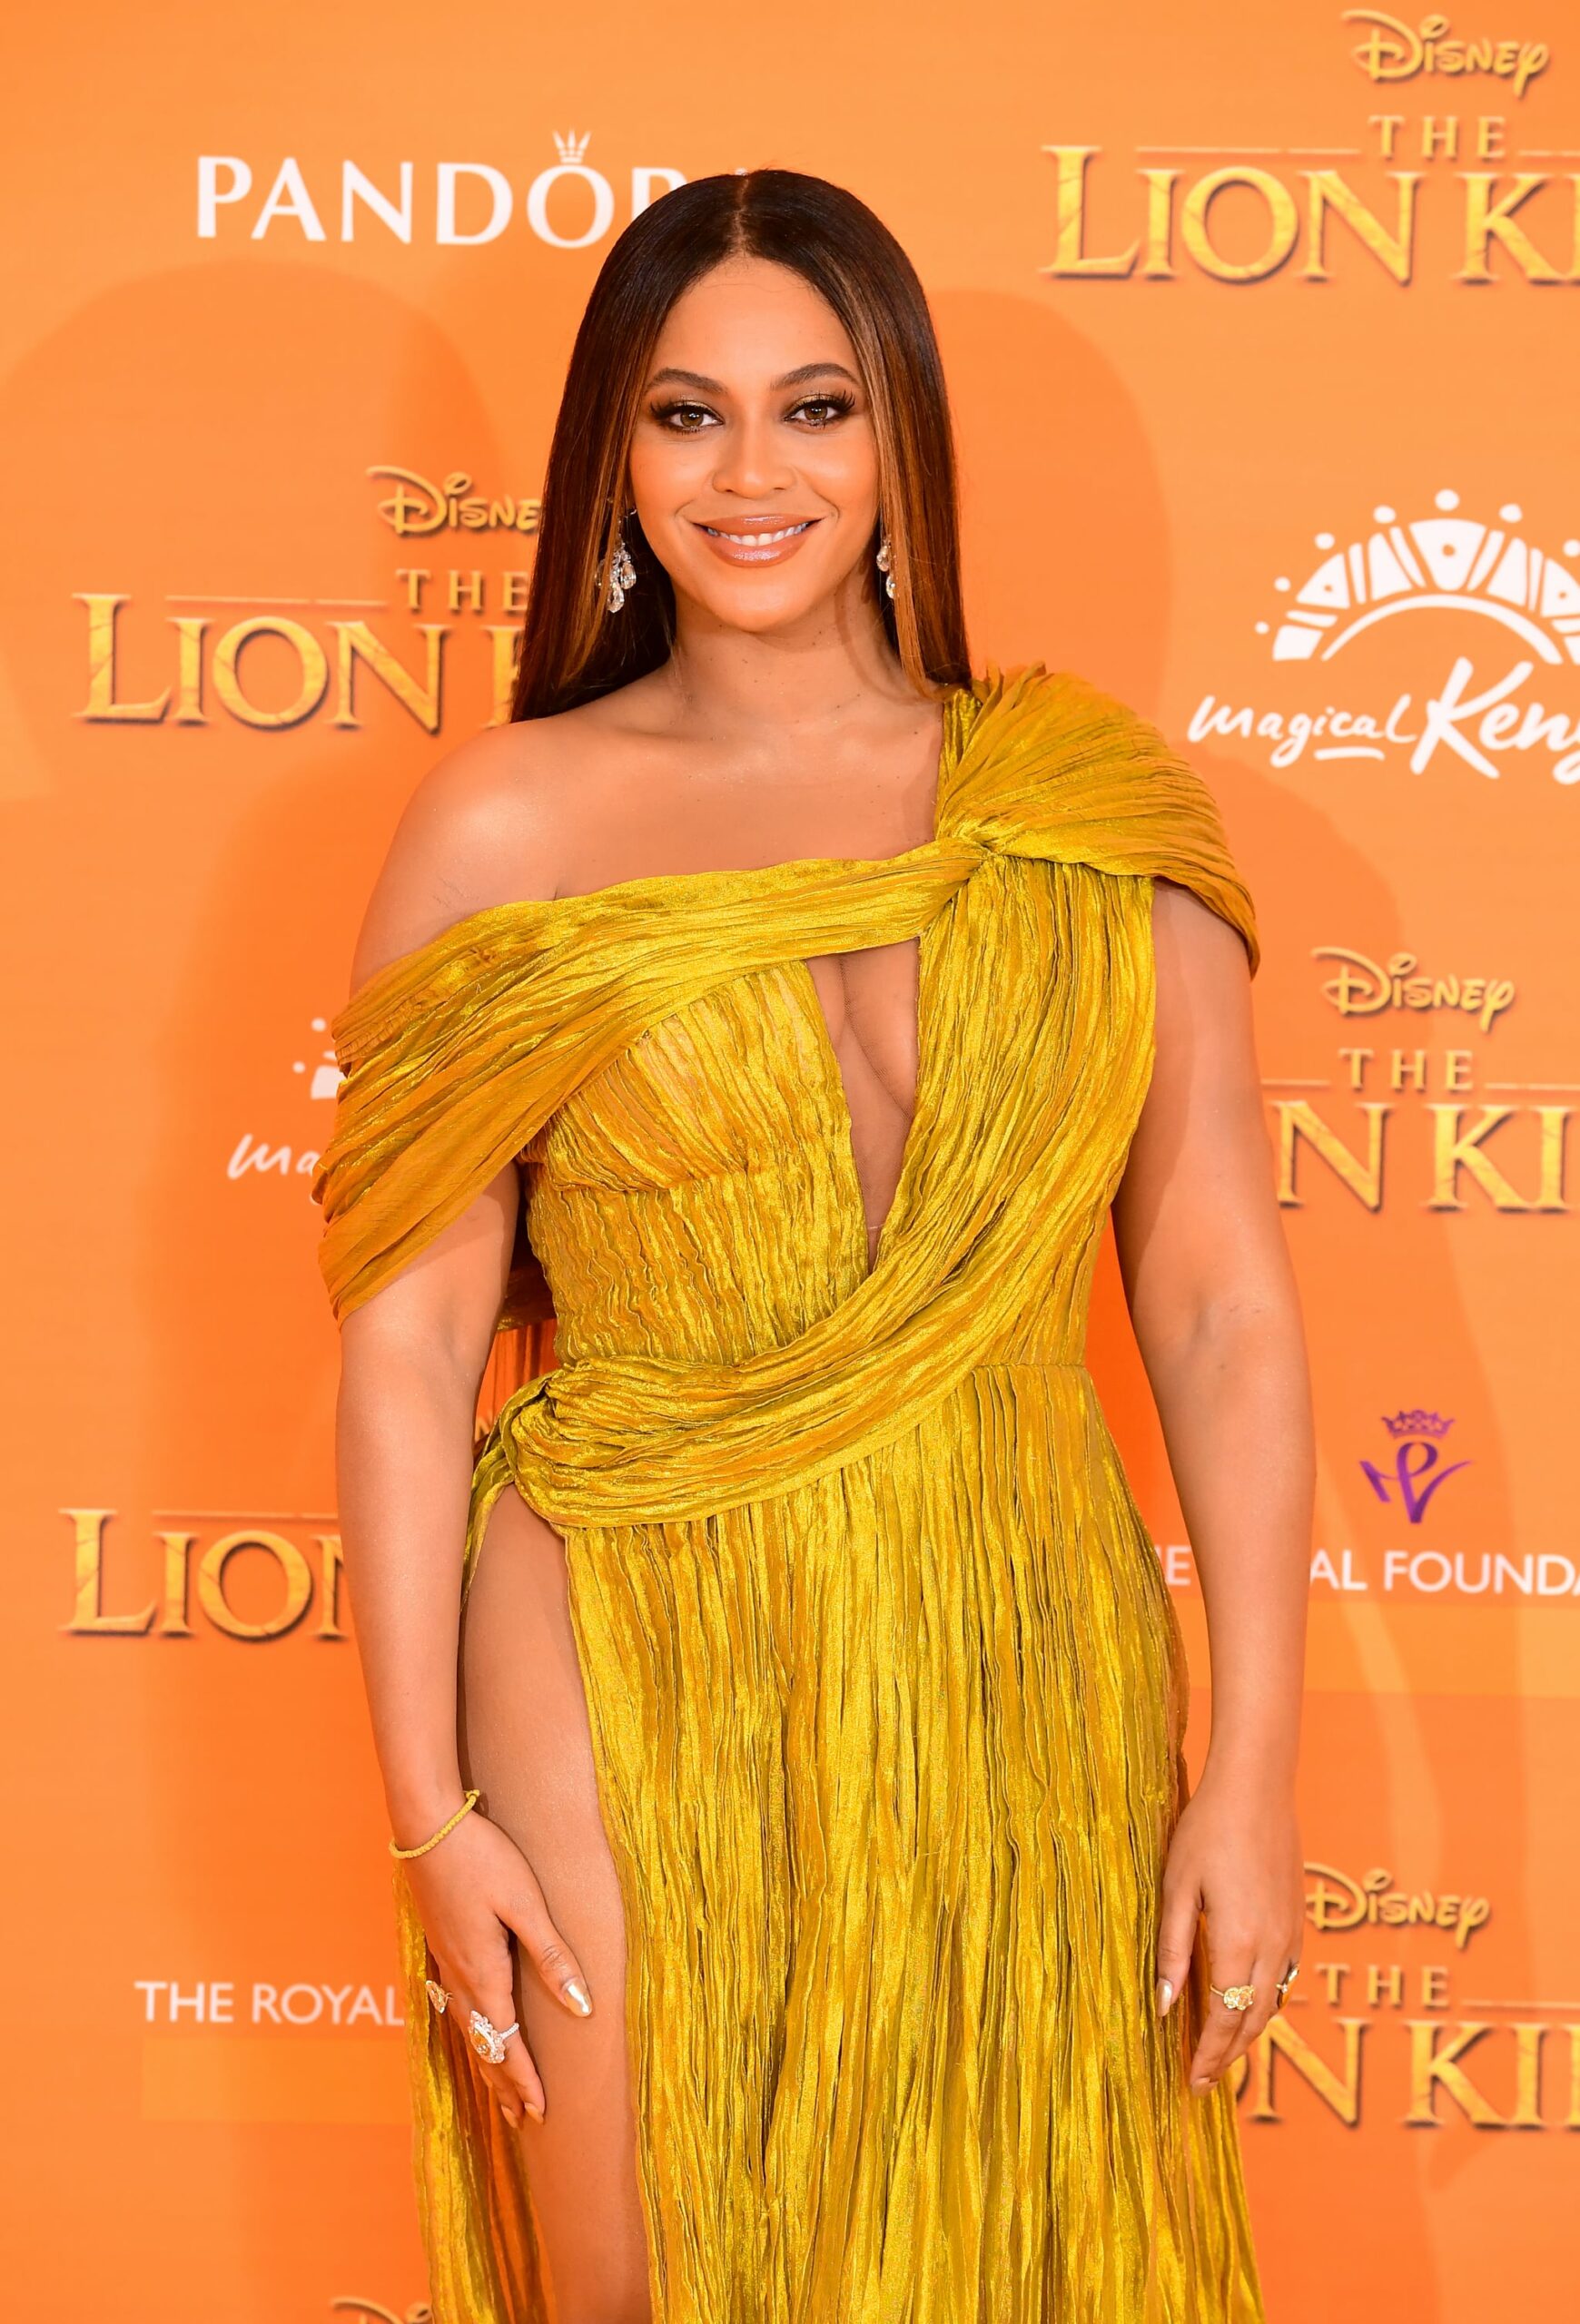 Beyonce attending Disney's The Lion King European Premiere held in Leicester Square, London. (Photo by Ian West/PA Images via Getty Images)